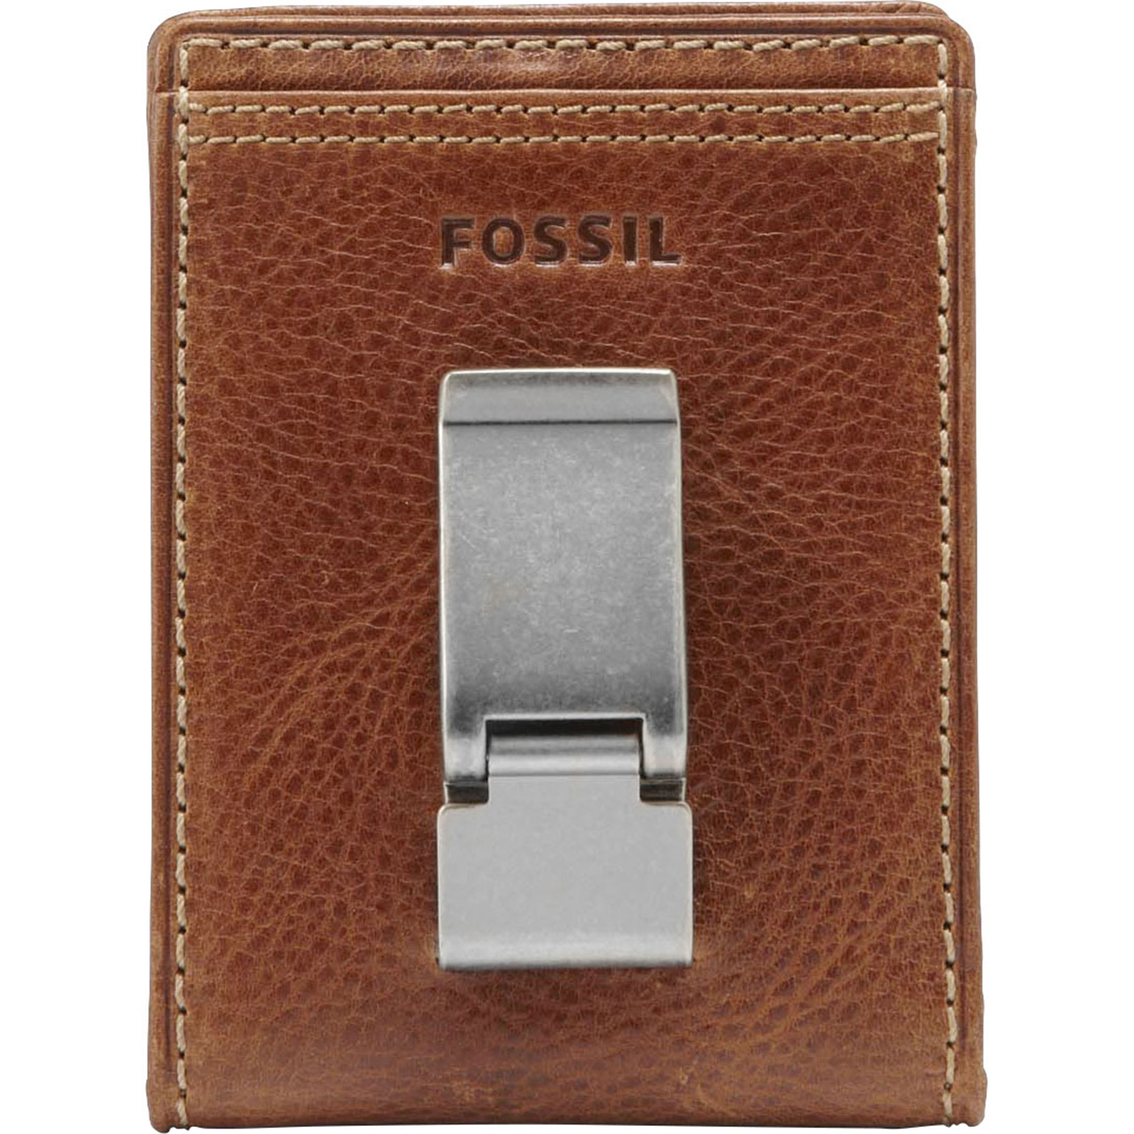 Fossil Bradley Id Bifold Wallet With Money Clip | Wallets & Money Clips ...